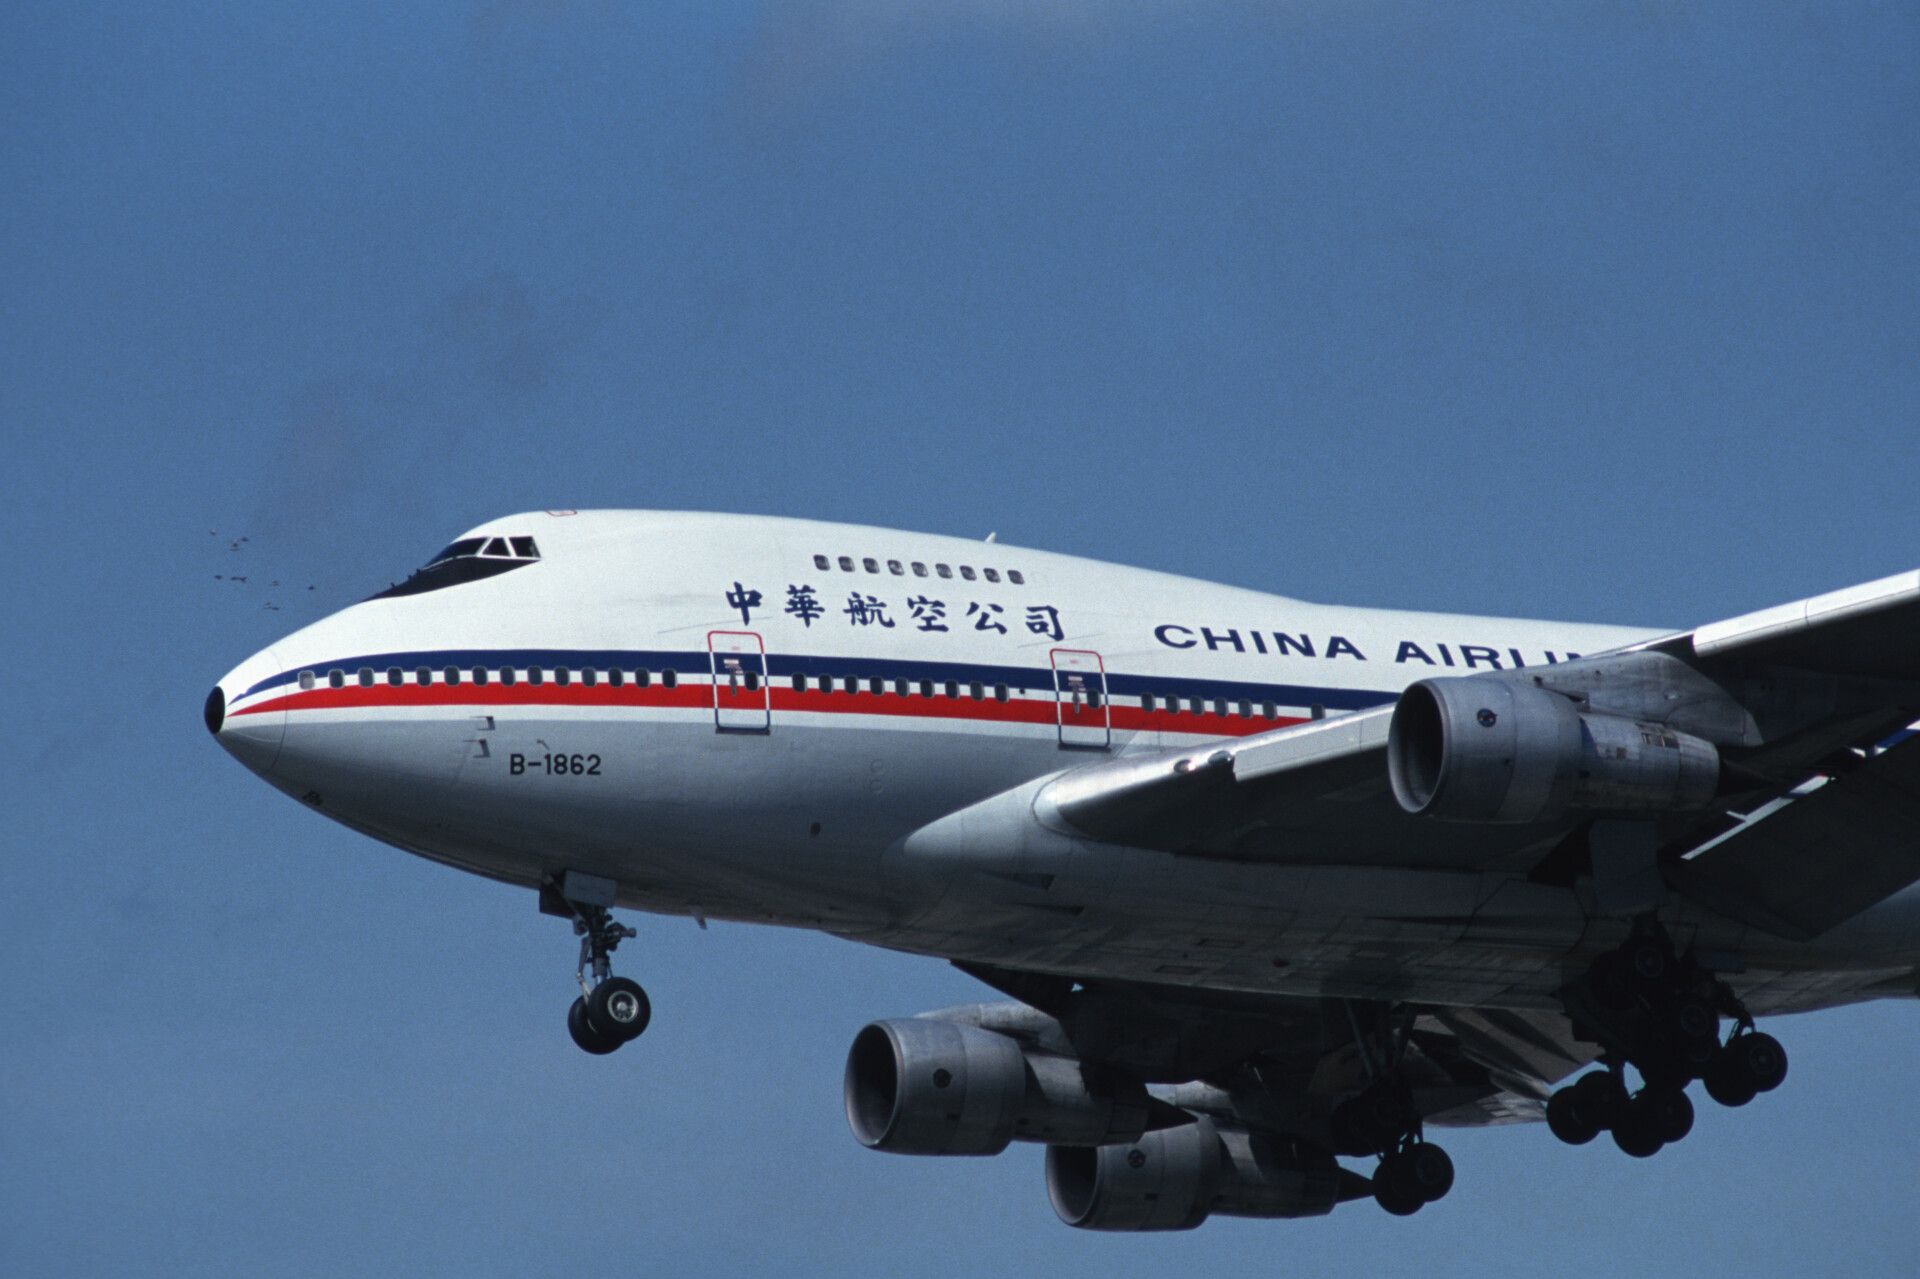 A China Airlines Boeing 747 lands at Kai Tak airport in